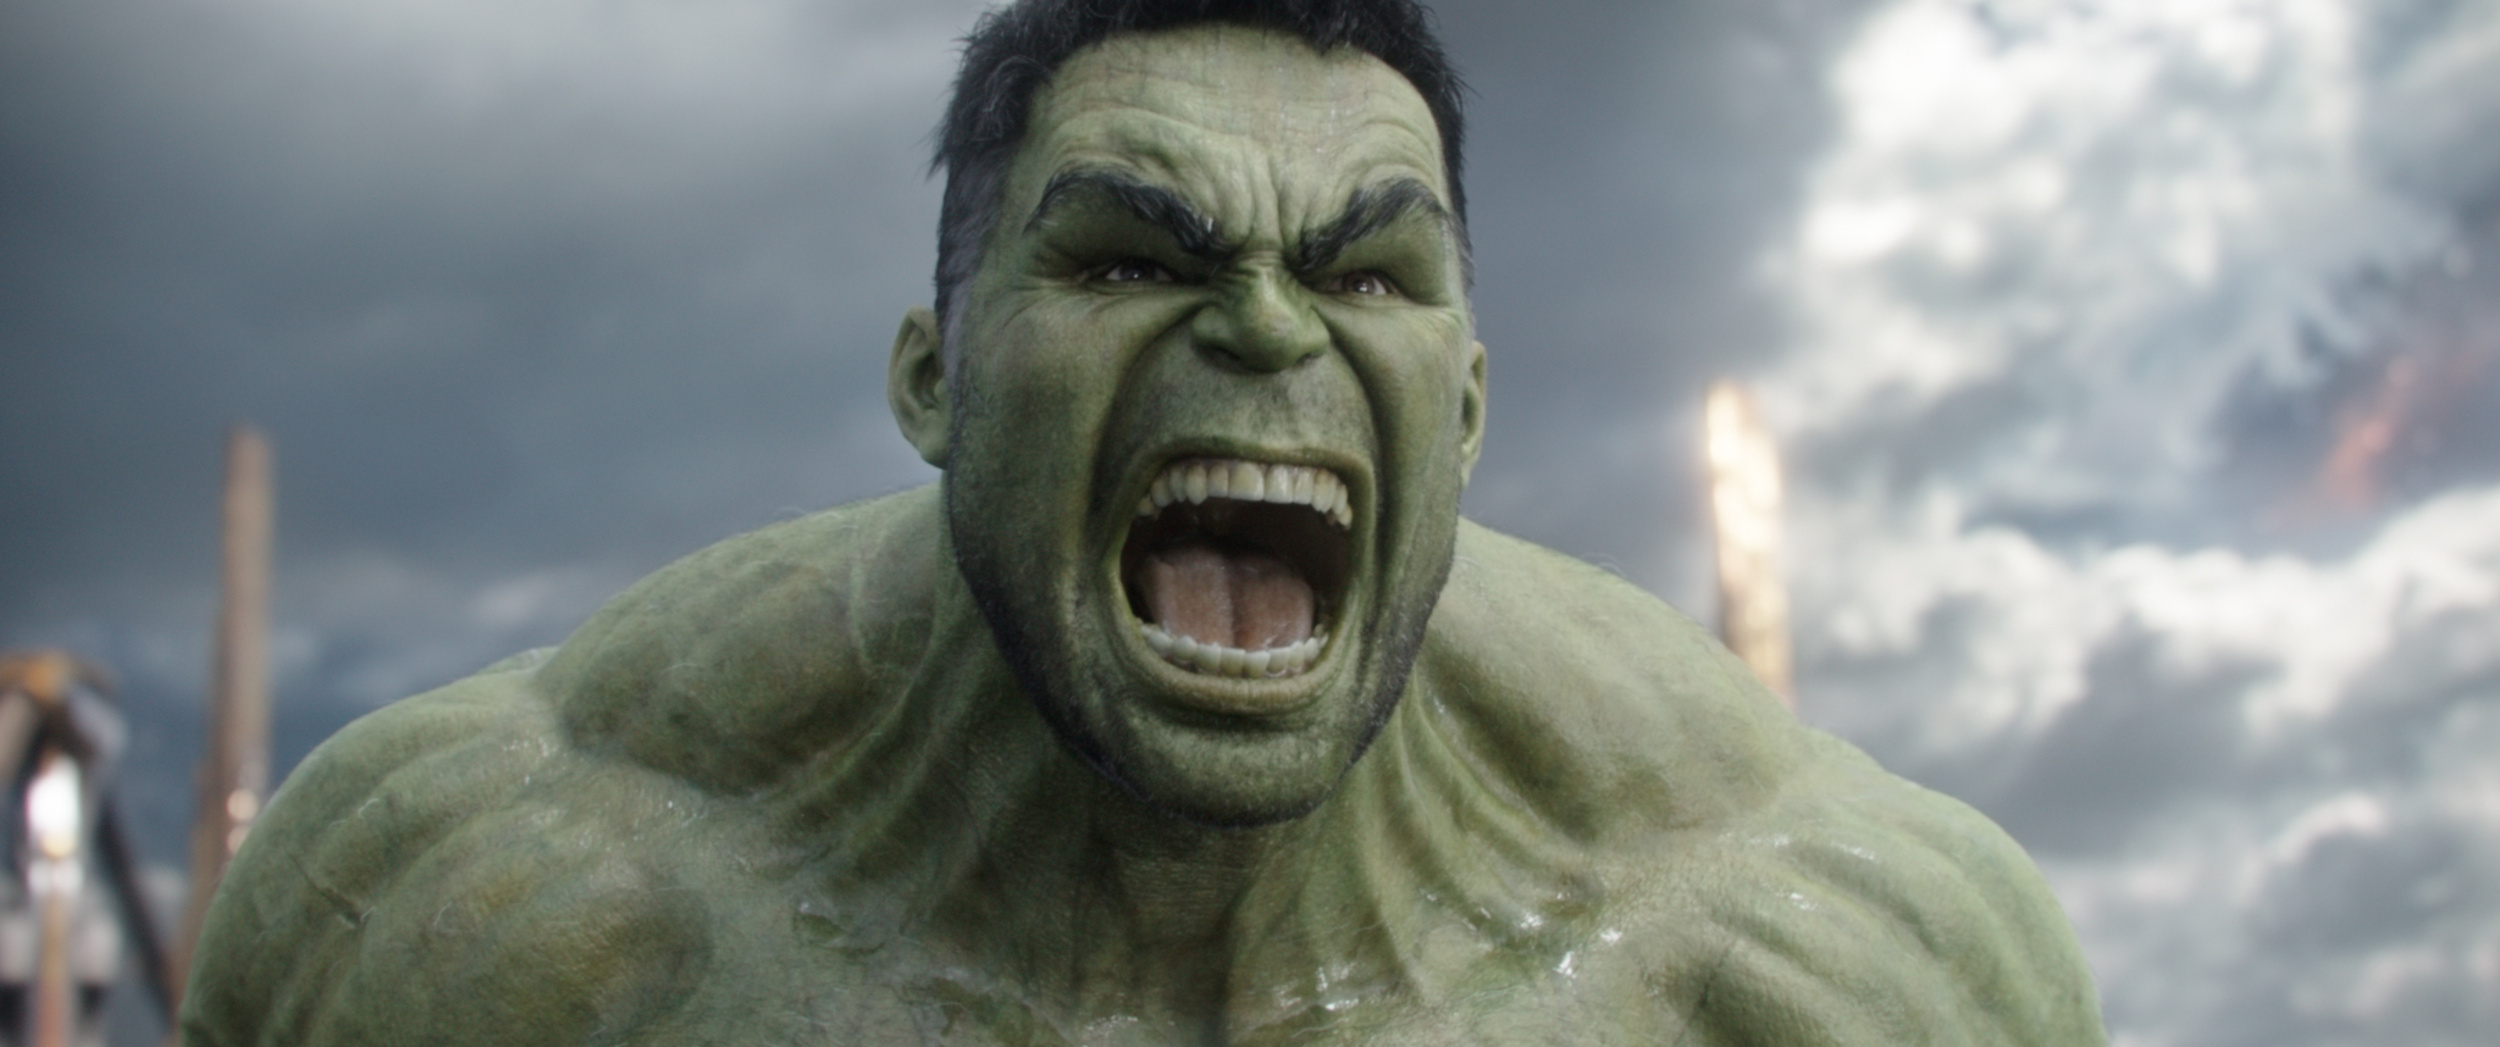 <p>As we’ve alluded to, there was a new Hulk movie in 2008. This one was attached to the MCU. Gone were Bana and Lee, with Norton starring and Louis Leterrier directing. However, Norton lived up to his reputation as being, um, “highly opinionated” about the moviemaking process. As such, when Hulk was brought back for <em>The Avengers</em>, Norton had been replaced by Mark Ruffalo. In July 2021, Bana explained to <em>Vulture </em>why <em>Hulk </em>frustrated him and why he'd never want to revisit the character.</p><p><a href='https://www.msn.com/en-us/community/channel/vid-cj9pqbr0vn9in2b6ddcd8sfgpfq6x6utp44fssrv6mc2gtybw0us'>Did you enjoy this slideshow? Follow us on MSN to see more of our exclusive entertainment content.</a></p>